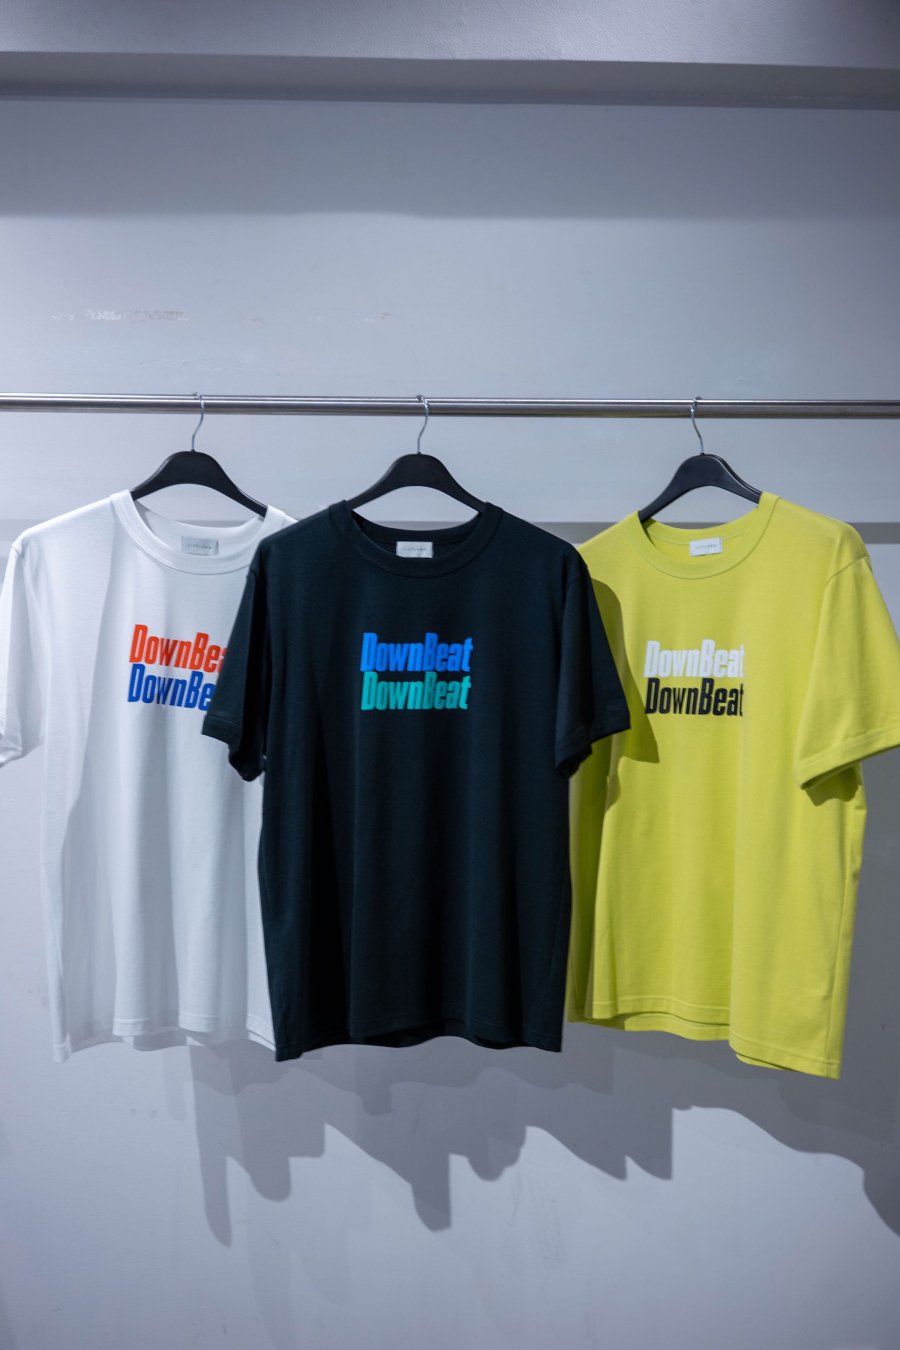 LITTLEBIG  DOWNBEAT TS(White or Black)<img class='new_mark_img2' src='https://img.shop-pro.jp/img/new/icons15.gif' style='border:none;display:inline;margin:0px;padding:0px;width:auto;' />